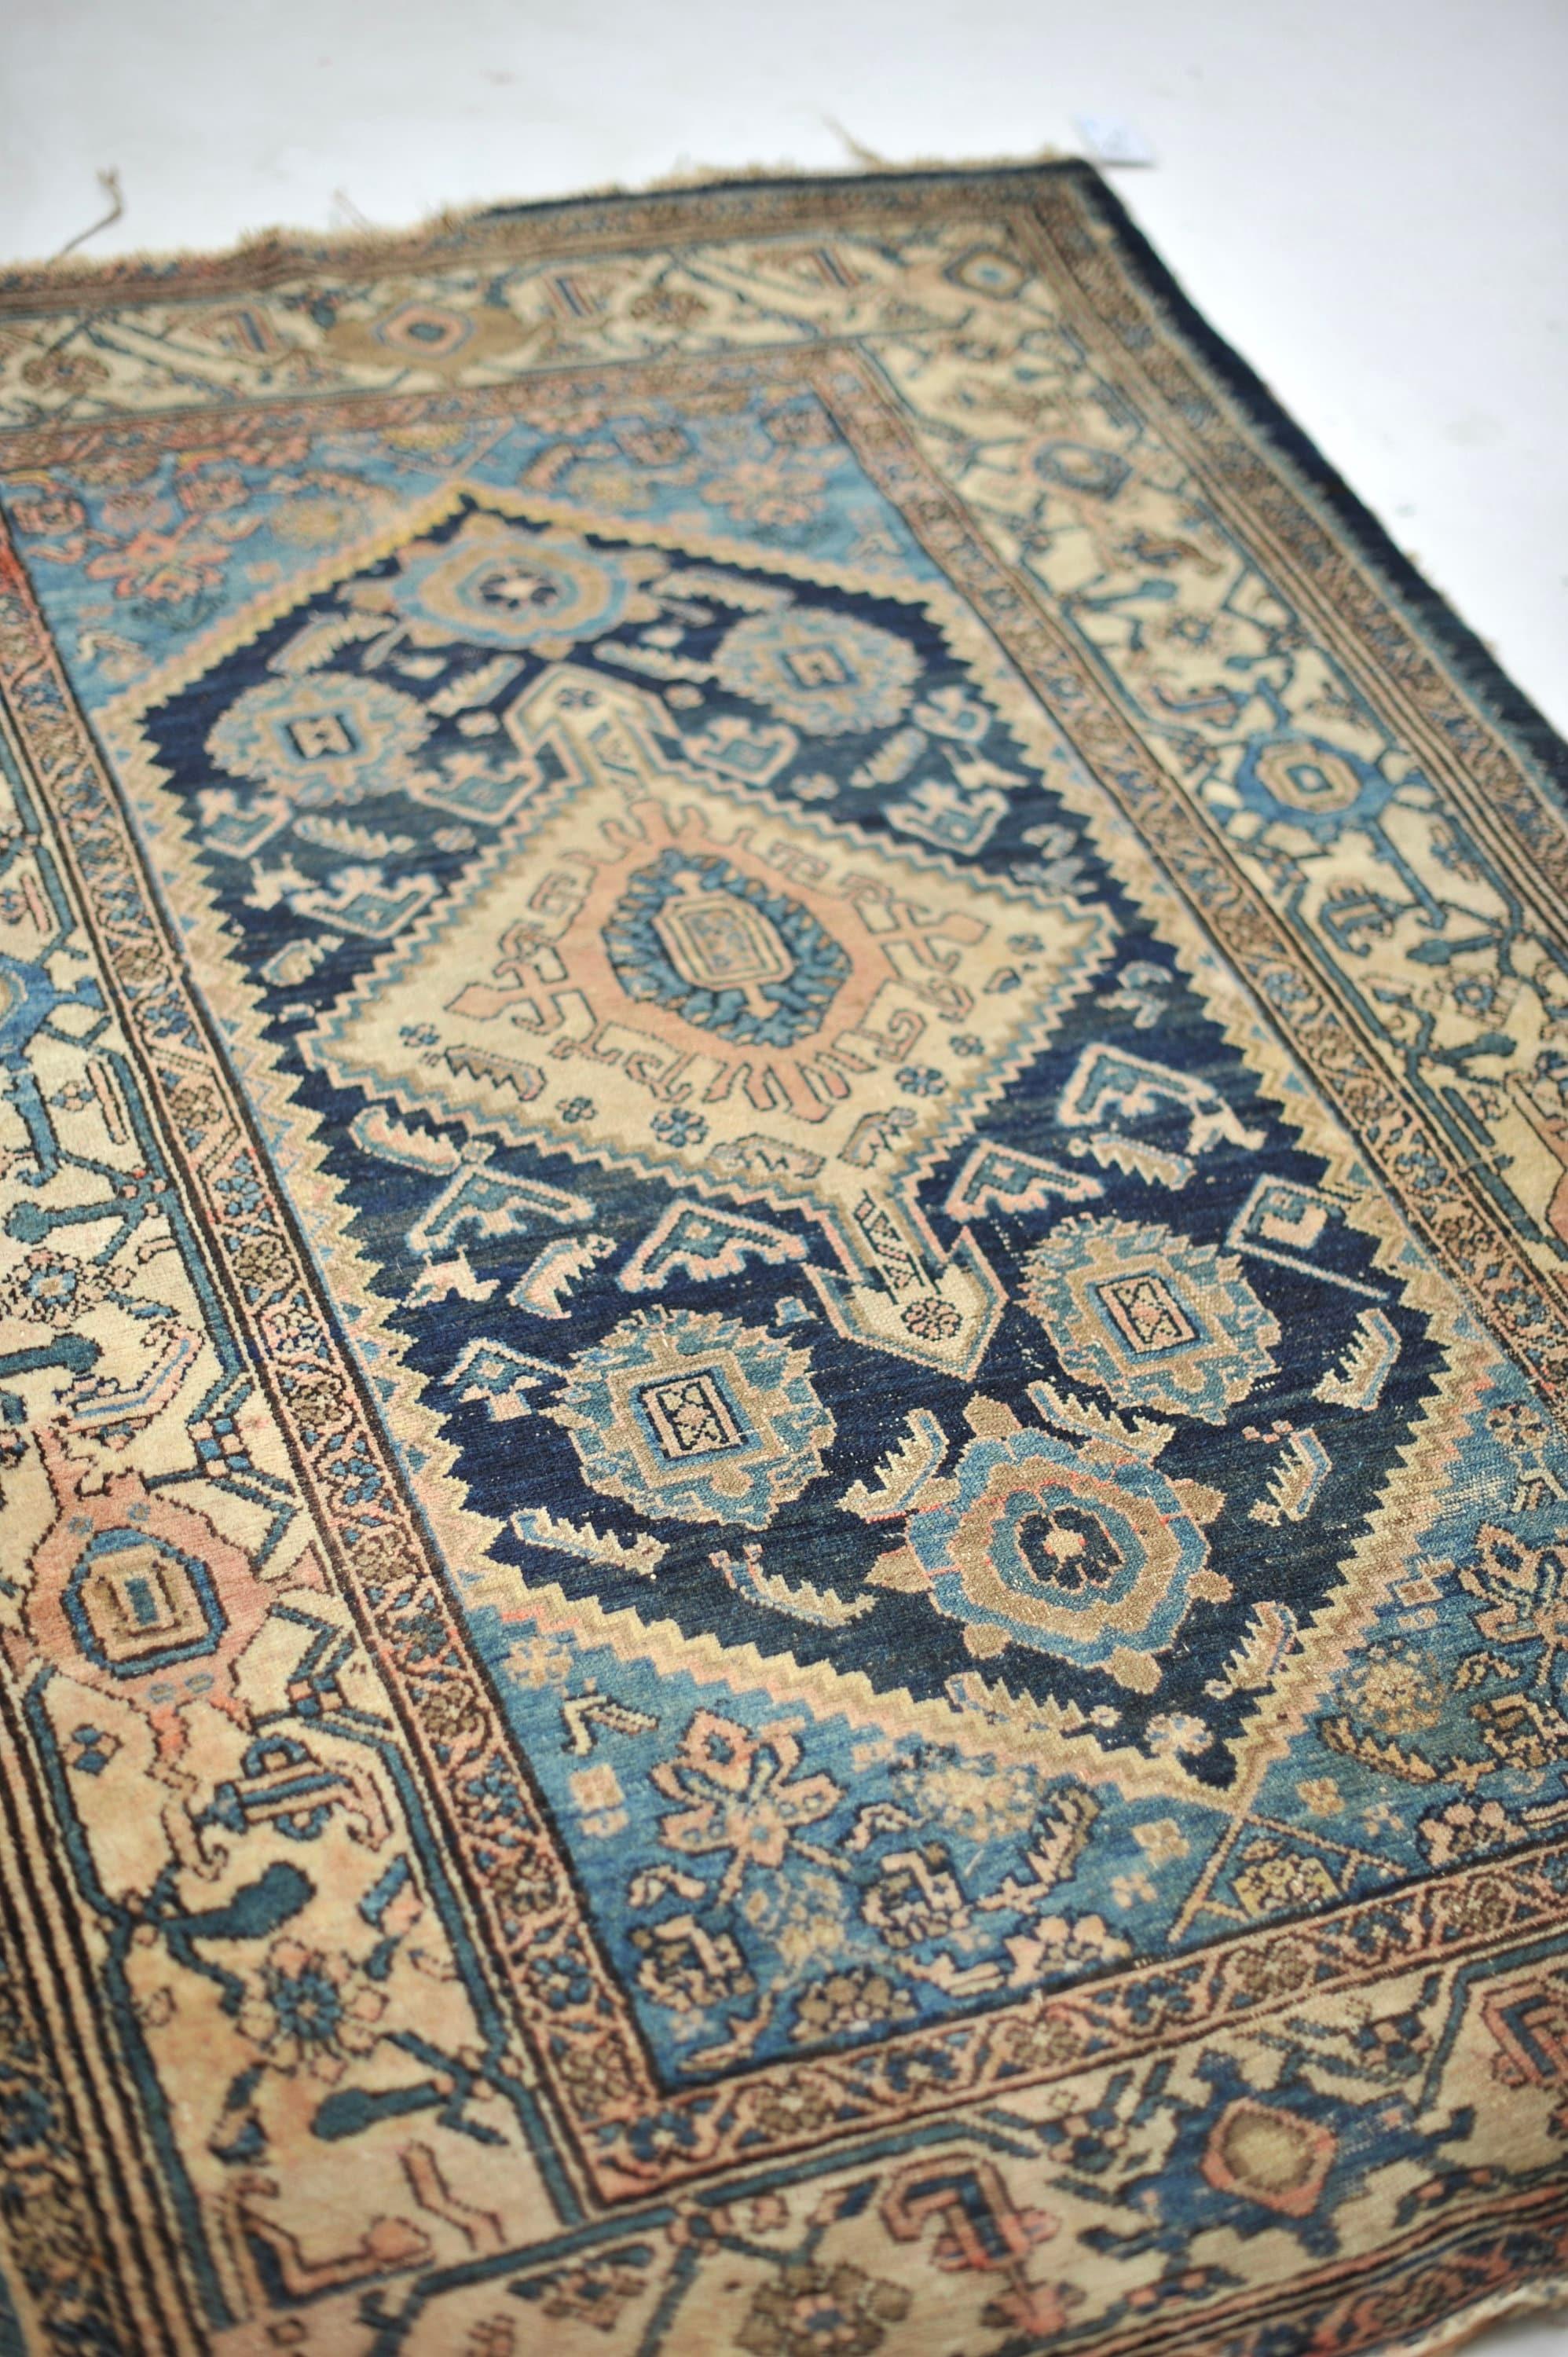 Nepolean Cool & Earthy Mystical Village Tribal Rug

About: One of the more beautiful, charming, and mystical pieces we have in our entire collection. This unusual color palette of a tremendous amount of cool blues and warm and earthy neutrals with